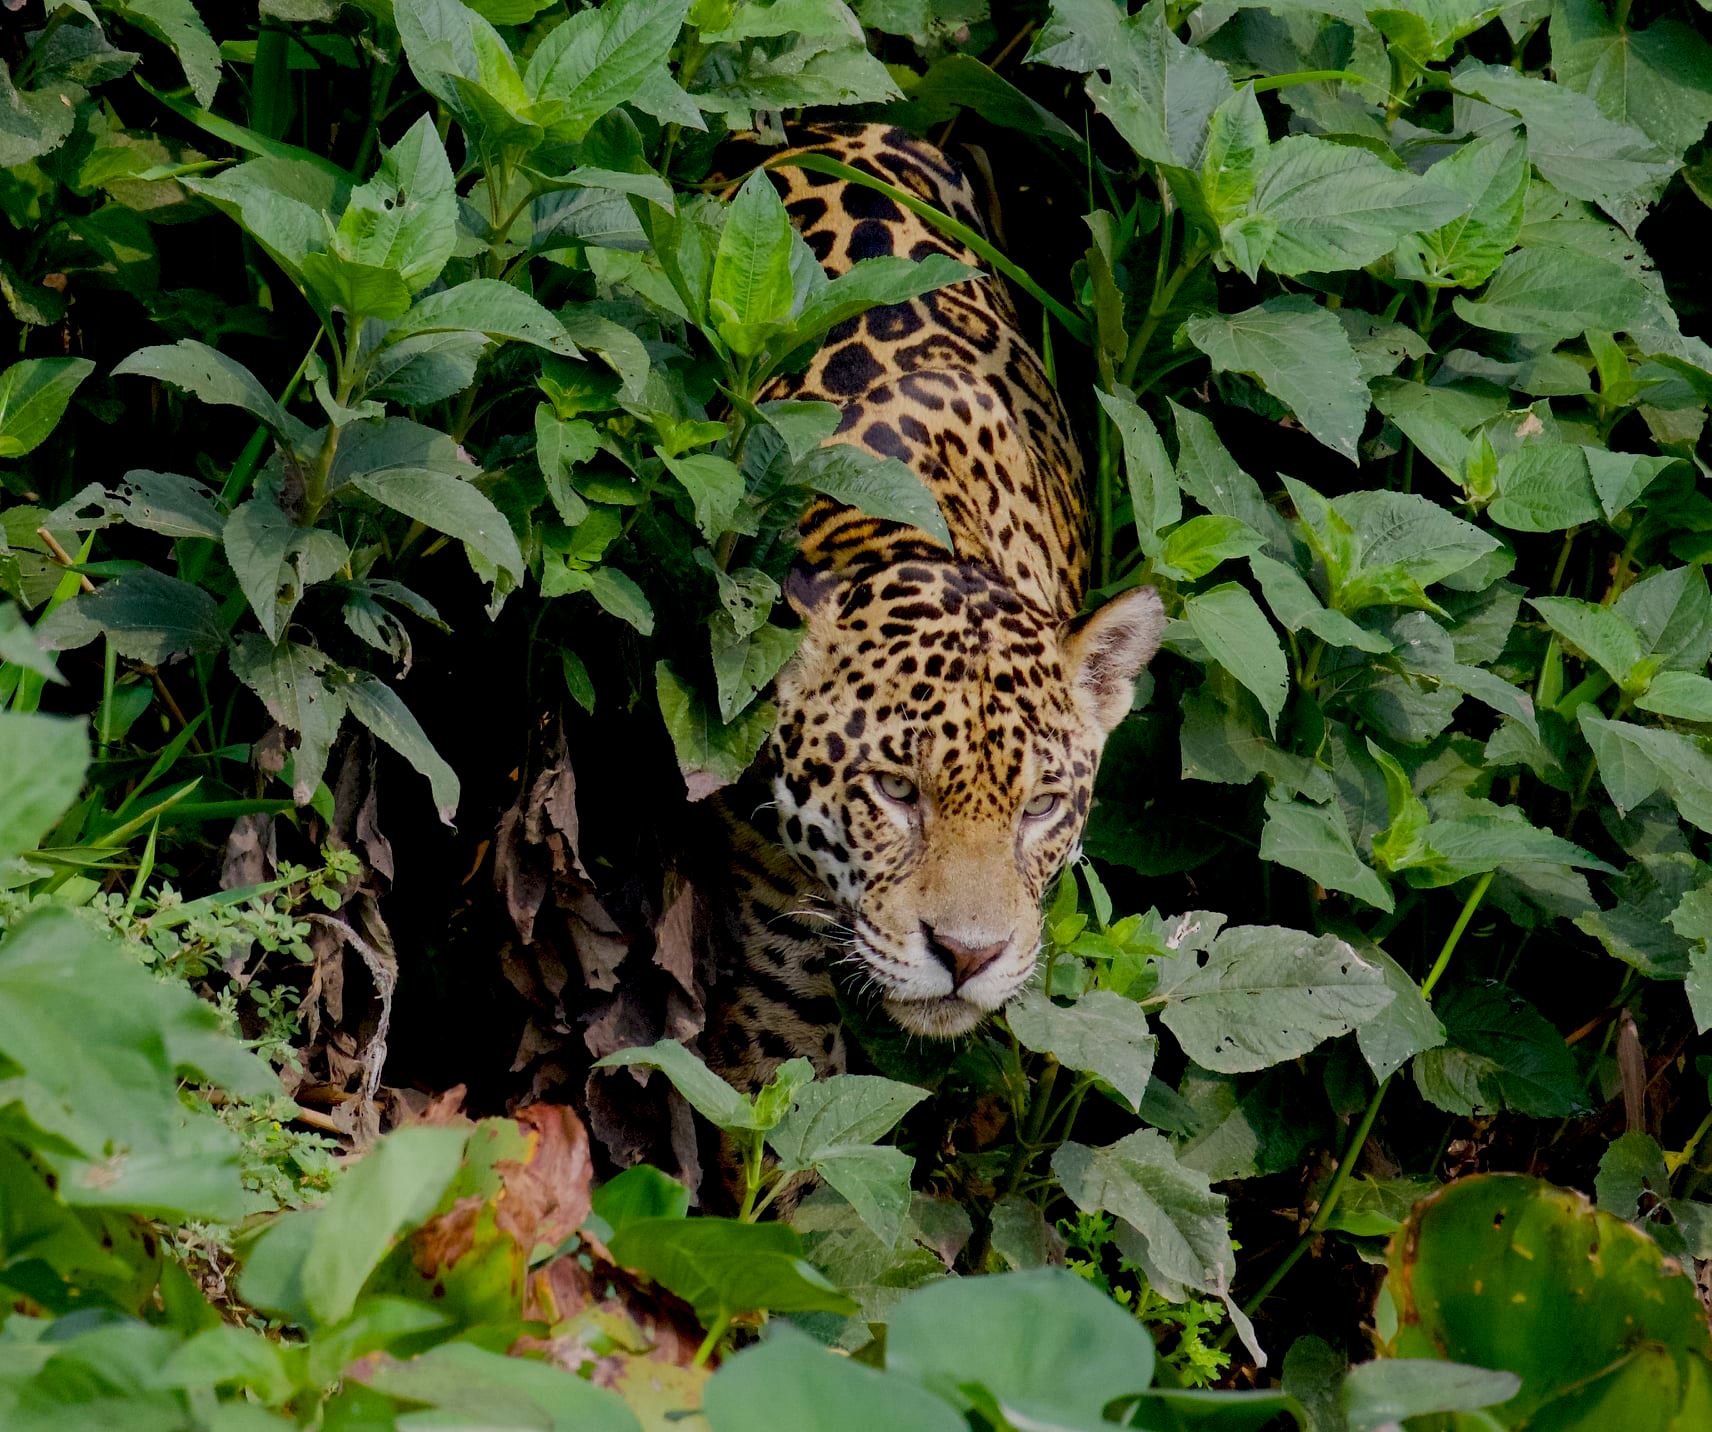 Brazil hosts the largest continuous jaguar habitat today, with an estimated population of more than 10,000 individuals